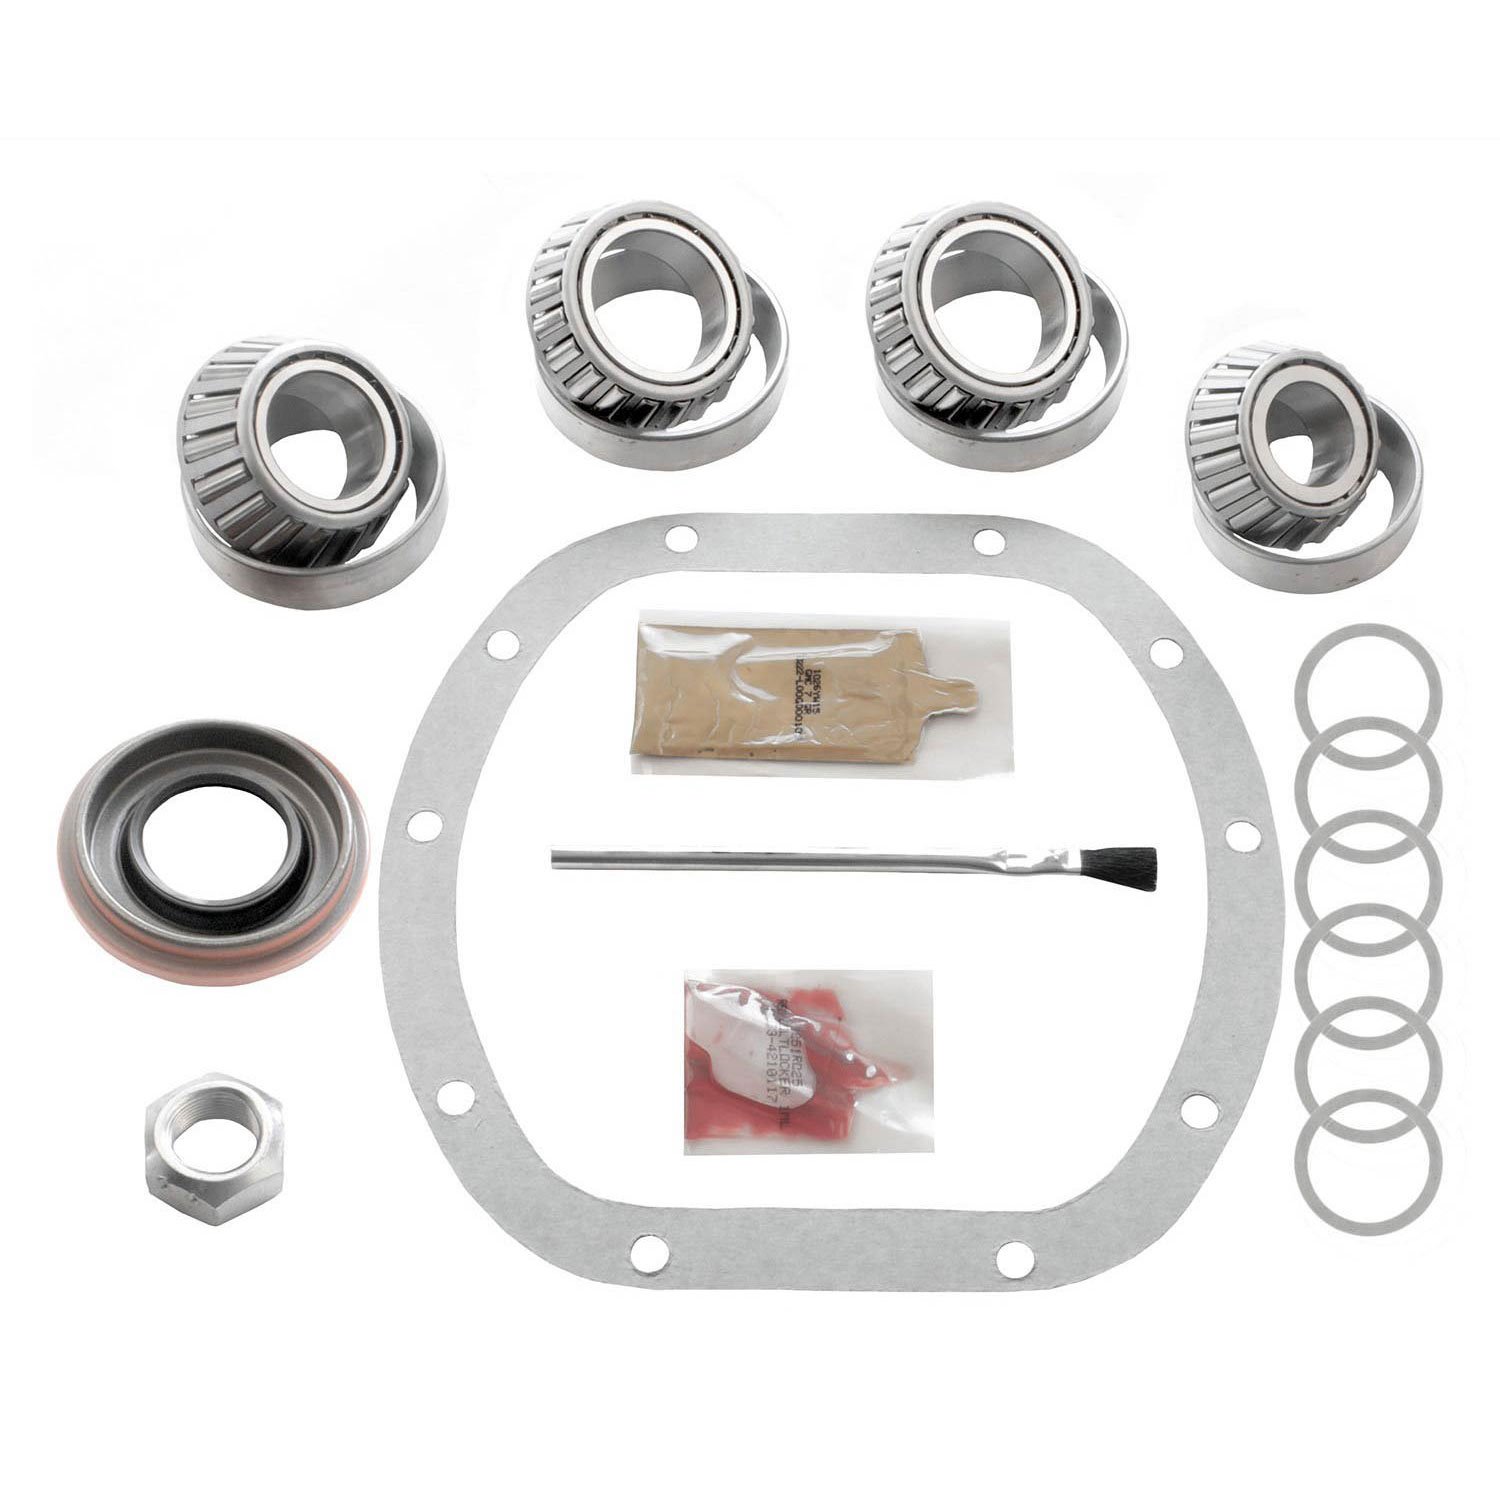 D30 REAR BRG SEAL GS KIT FORD